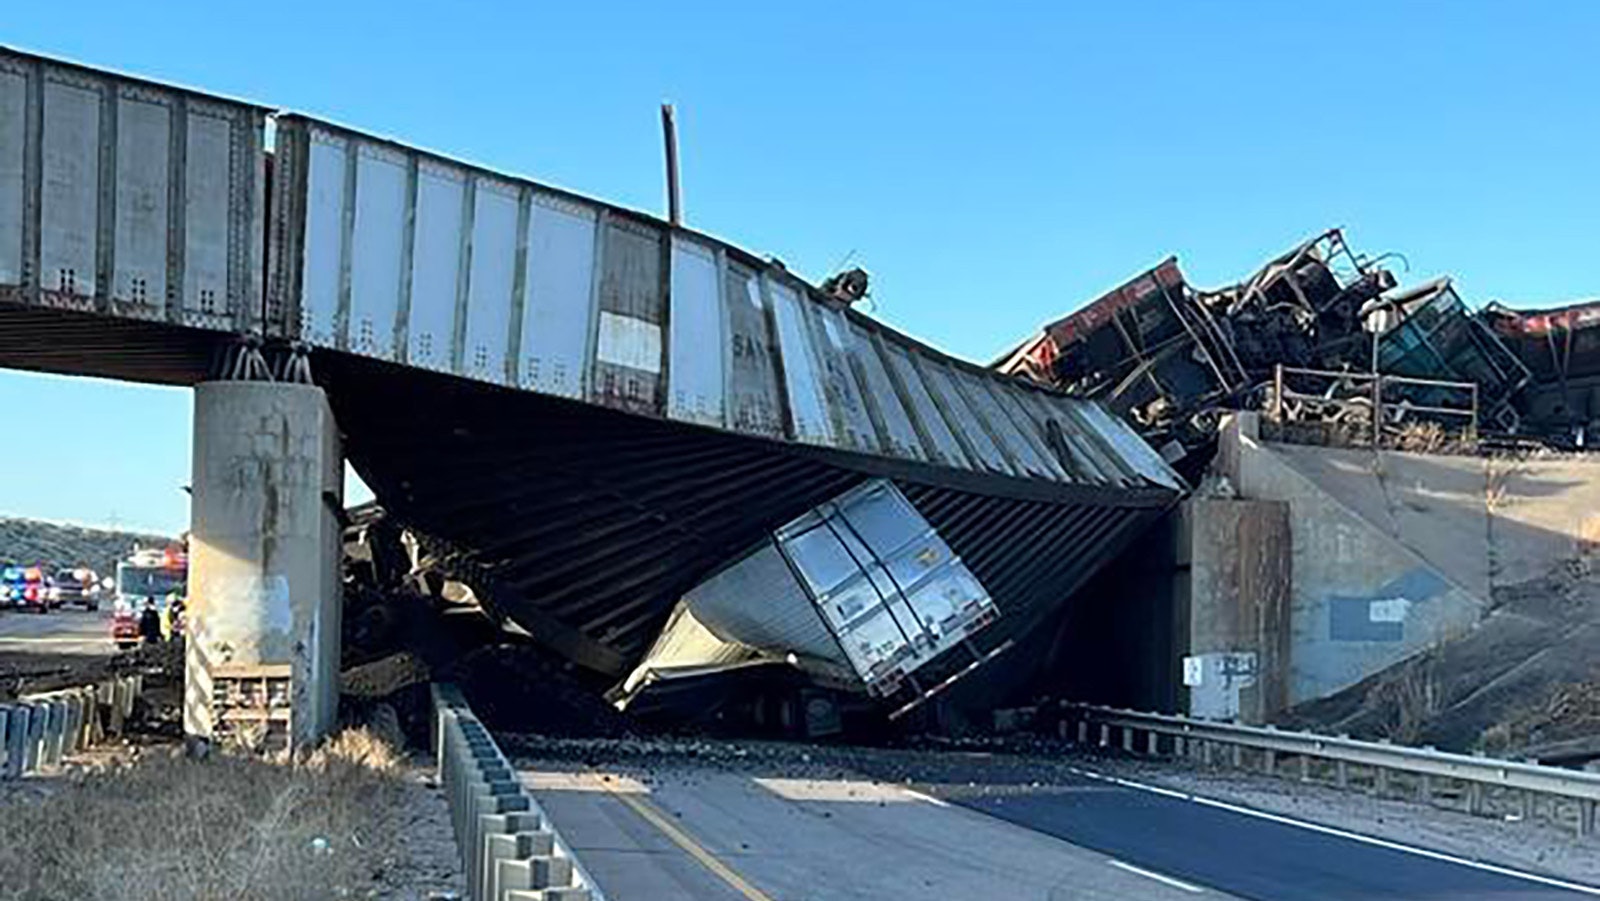 The 60-year-old driver of a semitrailer was killed with this bridge collapsed on it when a loaded coal trail derailed over Interstate 25 on Sunday afternoon north of Pueblo, Colorado.